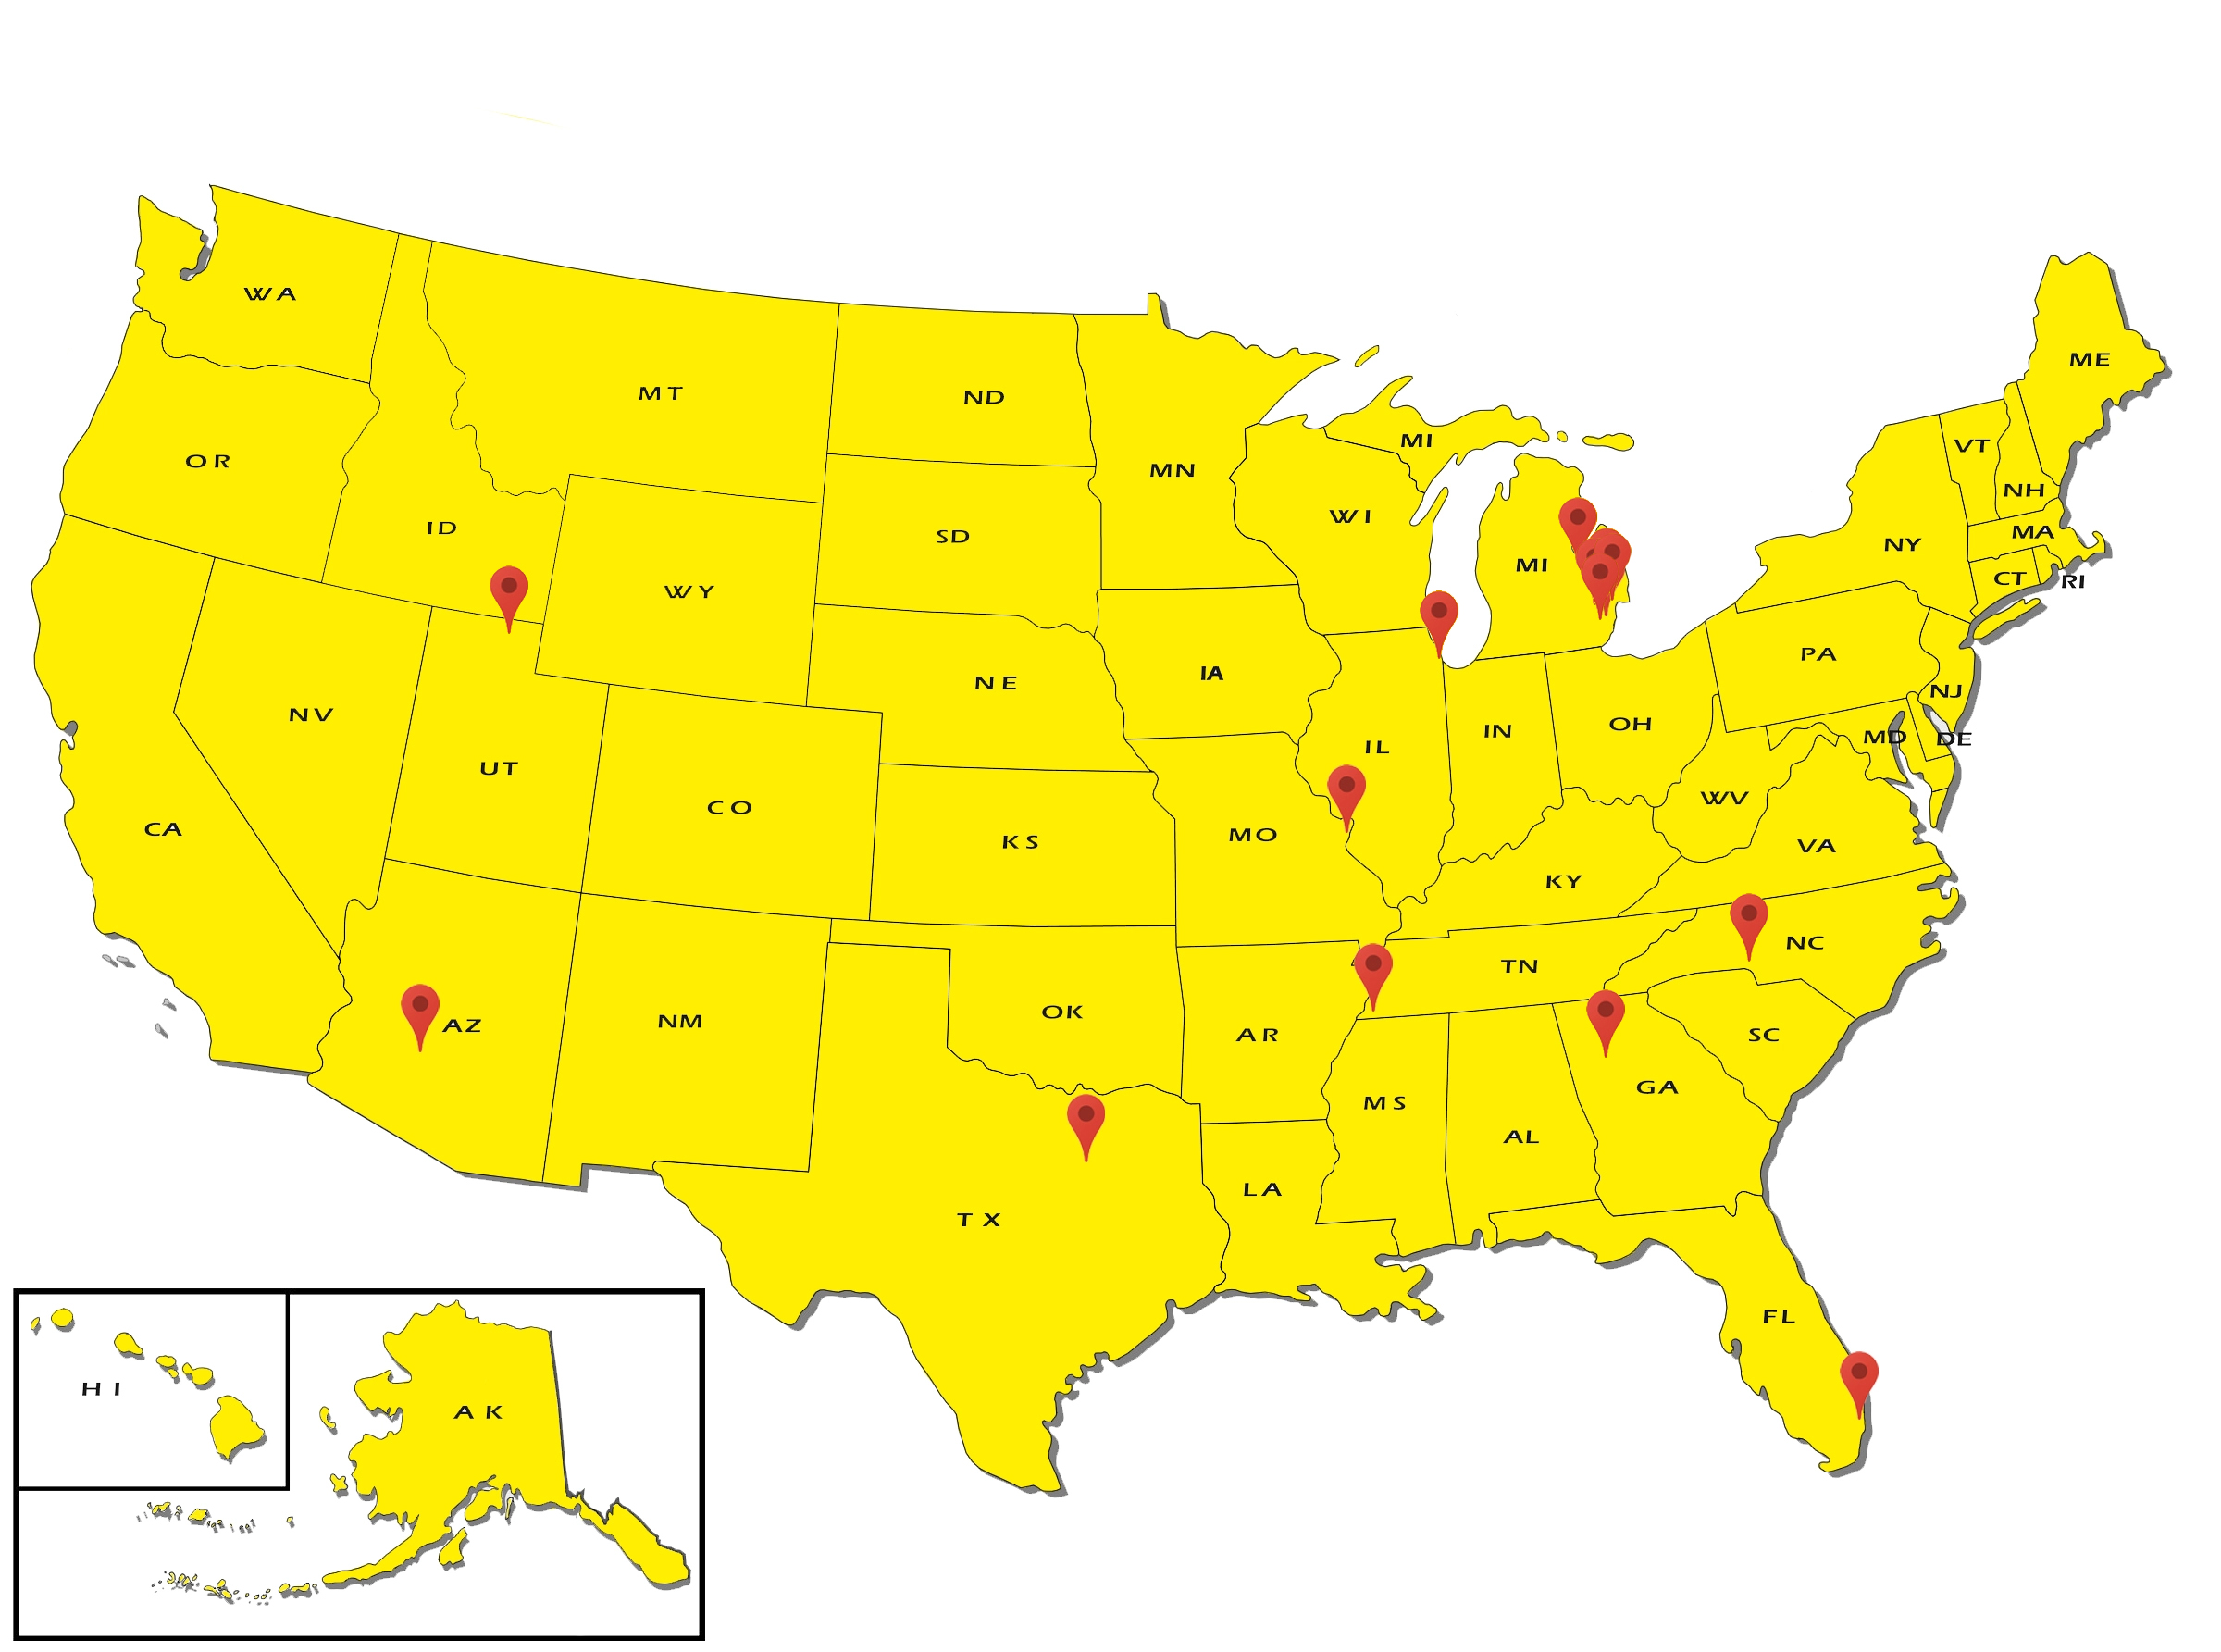 Map of the US with areas highlighted where a mezzanine was installed